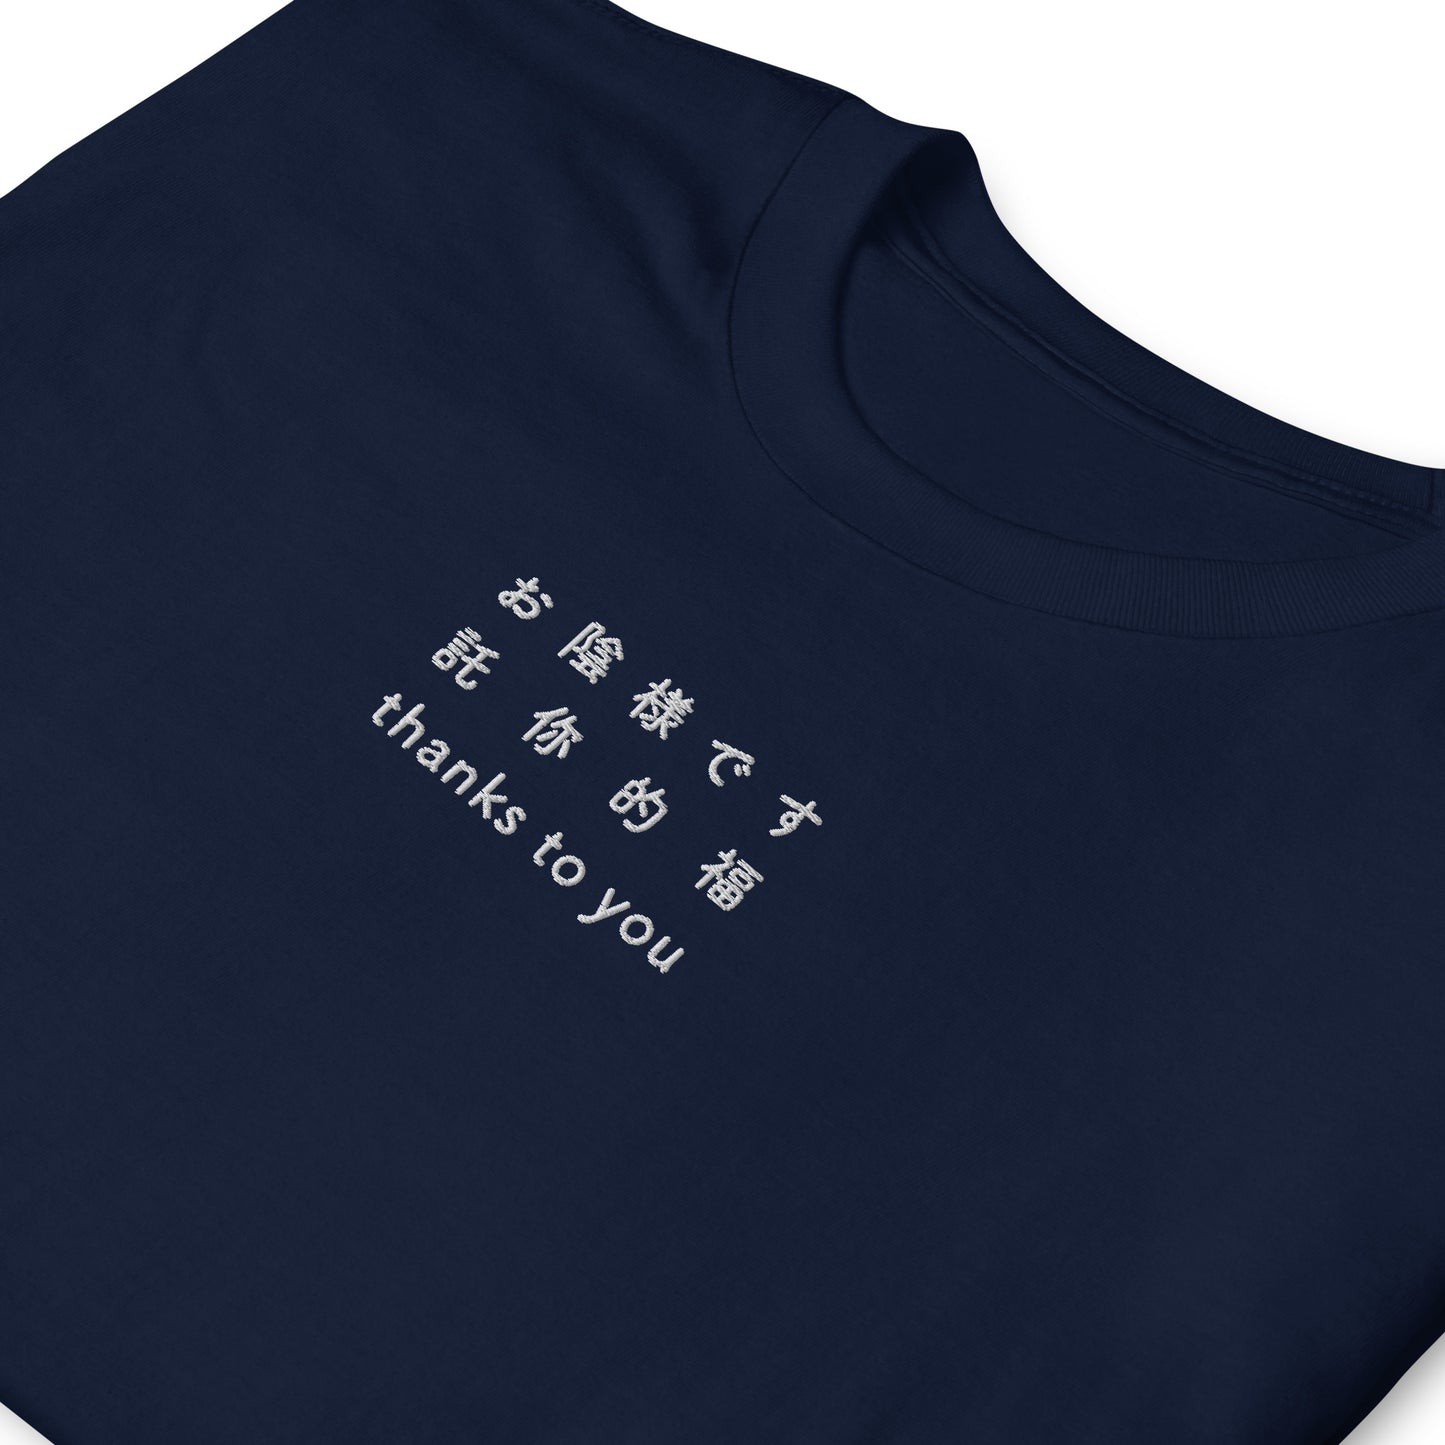 Navy High Quality Tee - Front Design with an white Embroidery "thanks to you" in Japanese,Chinese and English